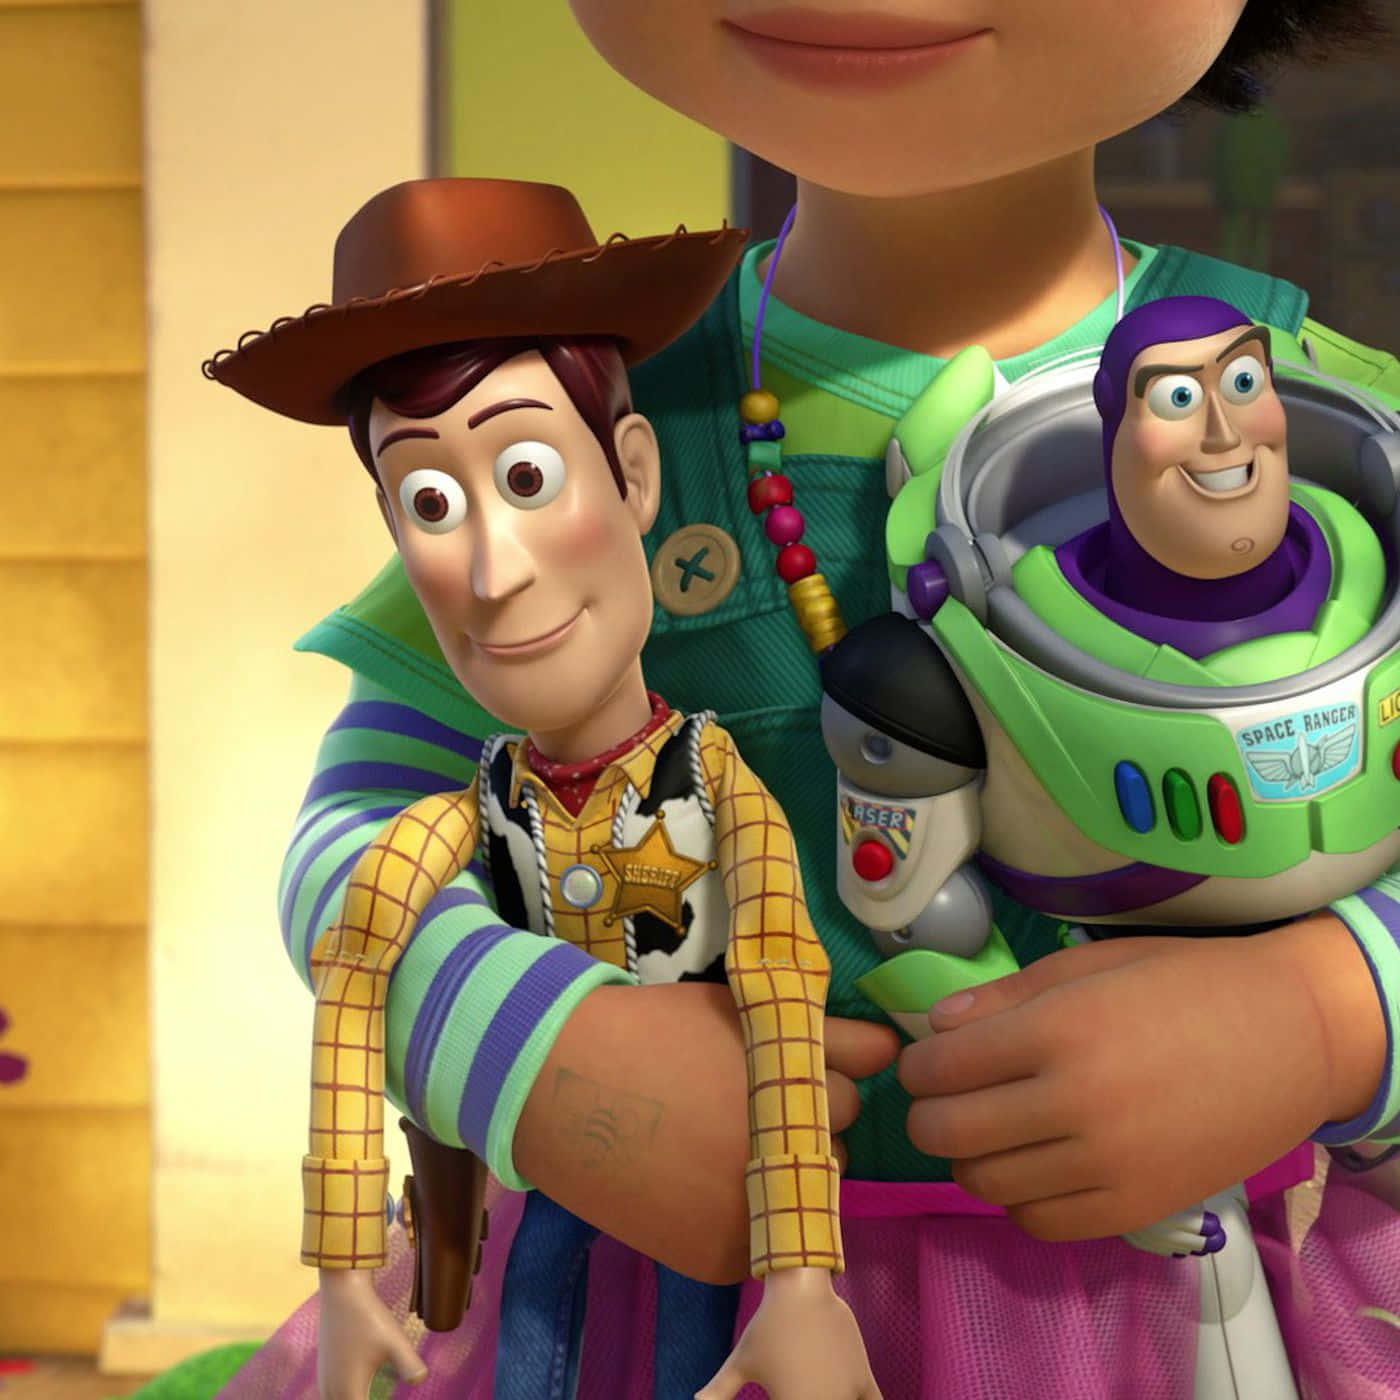 Imagende Toy Story 4 Con Woody Y Buzz Lightyear.